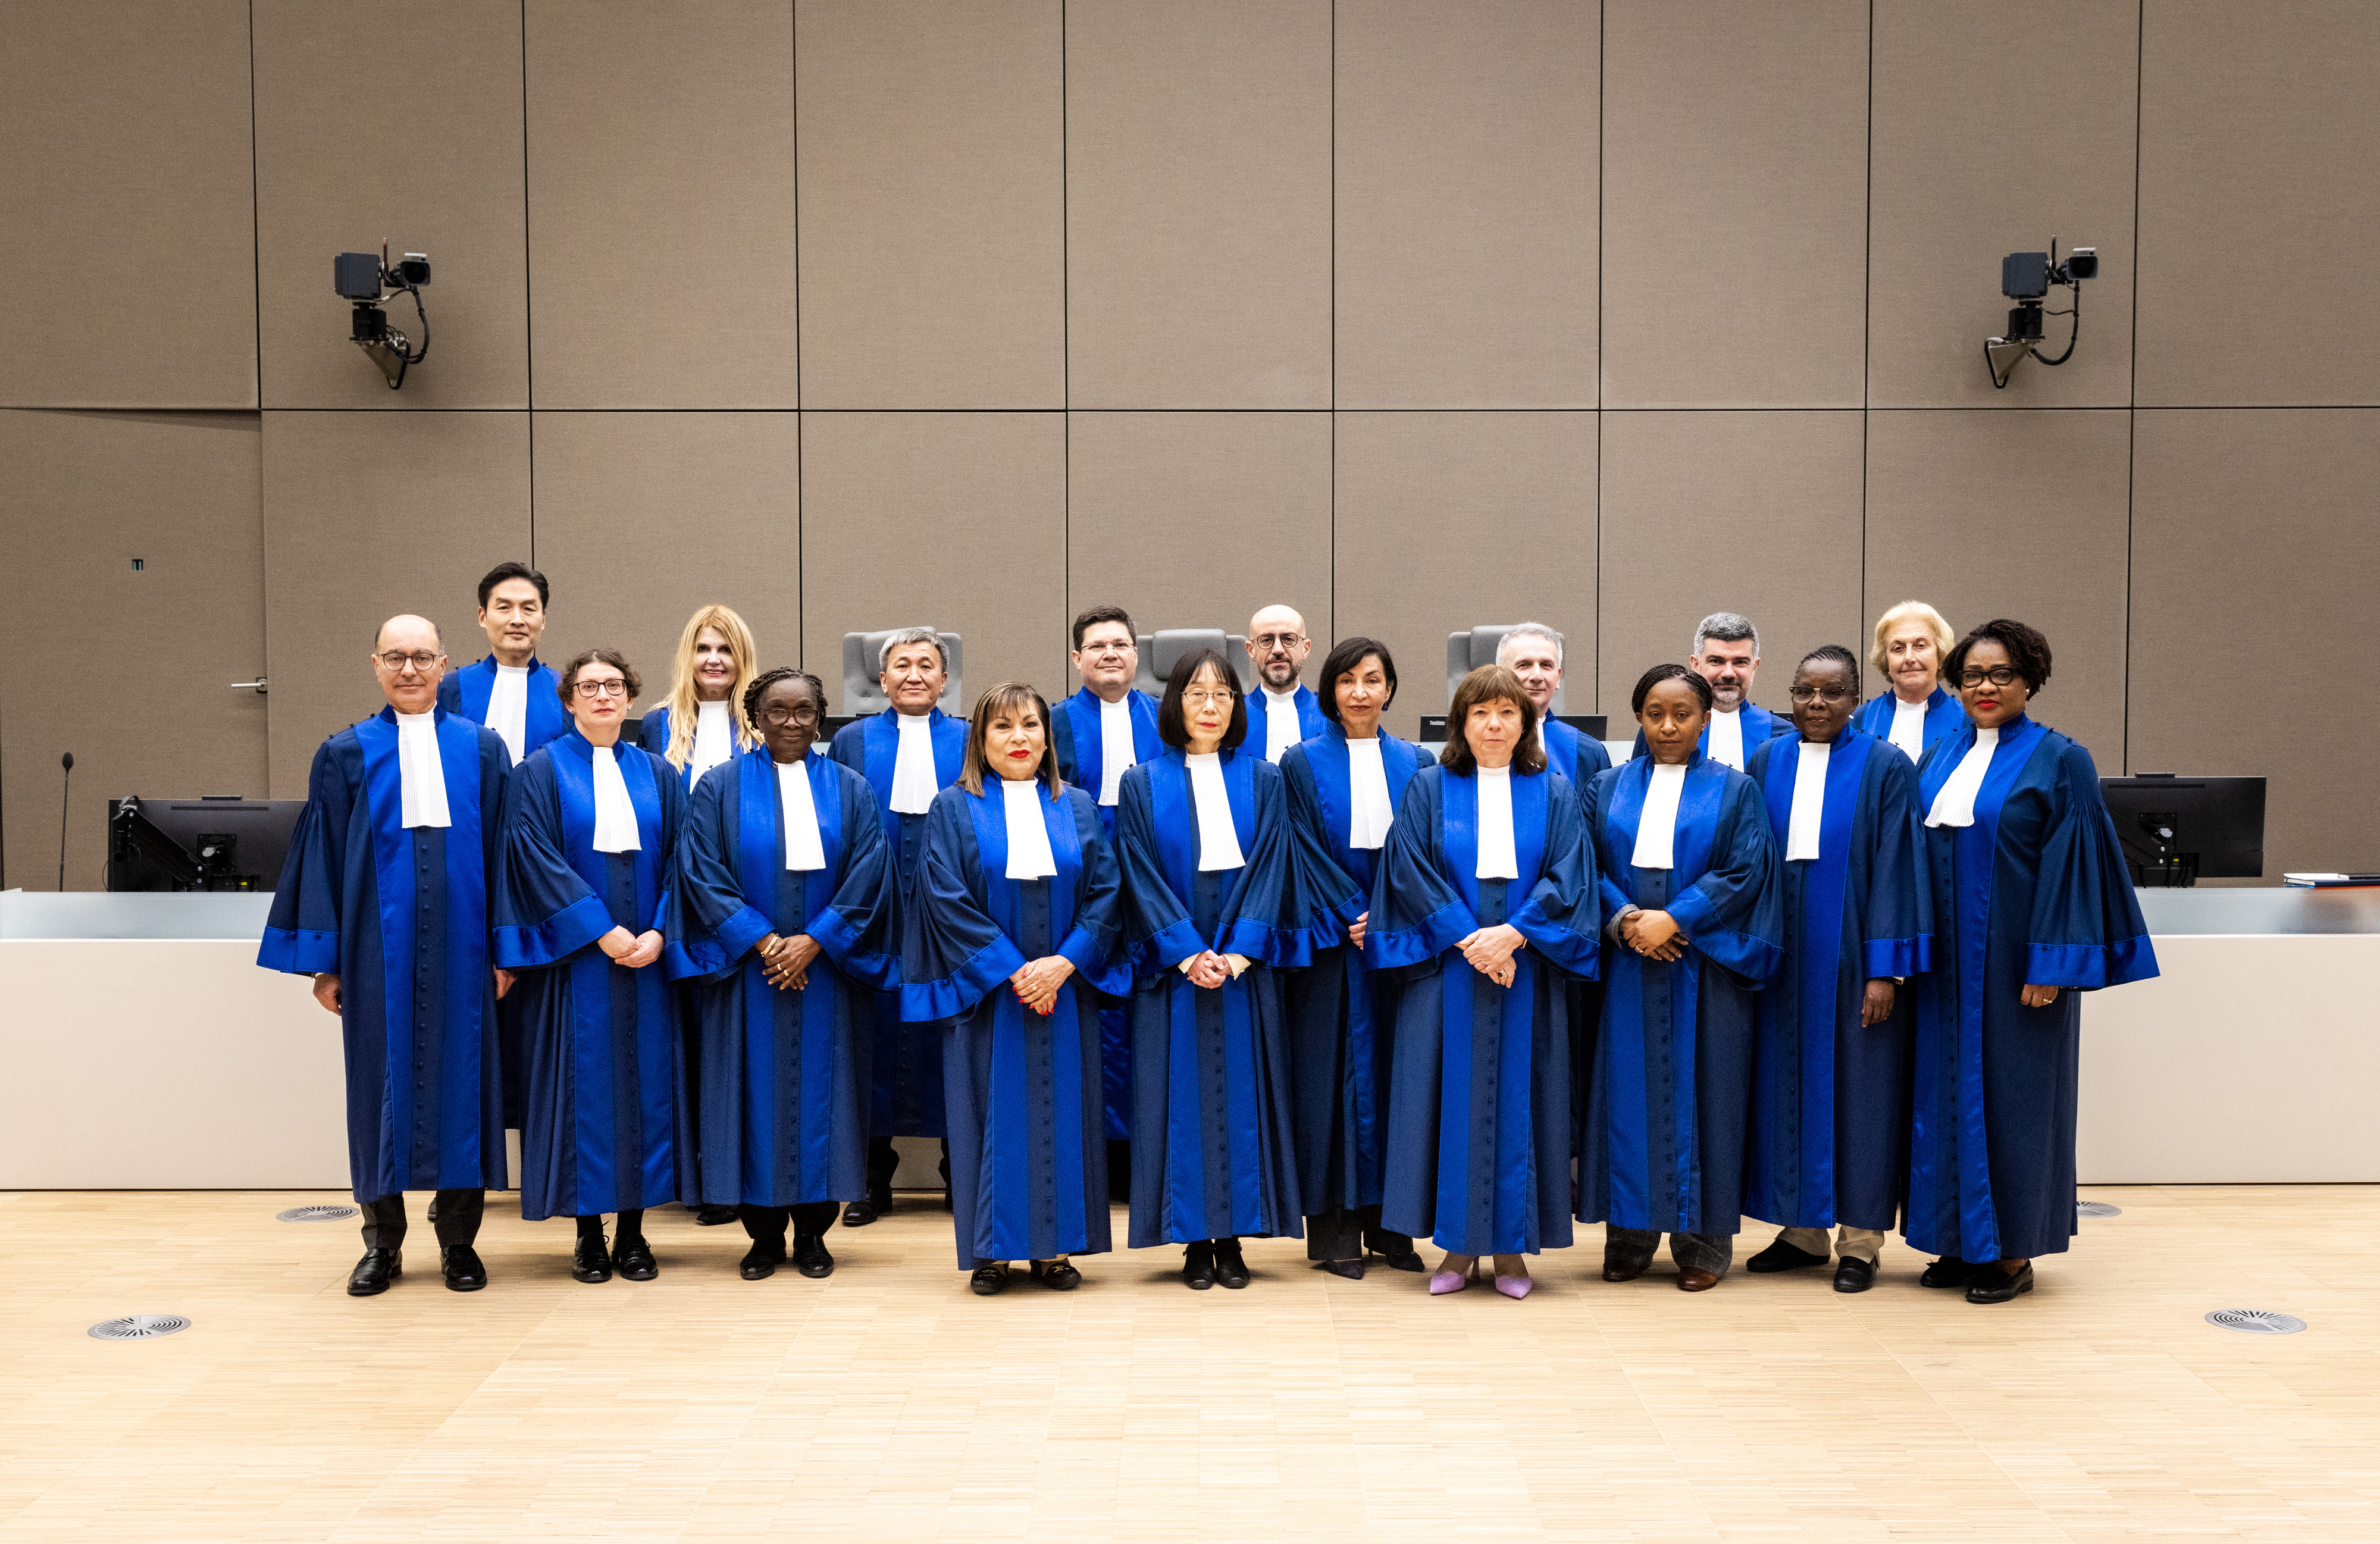 The ICC's 18 judges are elected by the Assembly of States Parties for their qualifications, impartiality and integrity, and serve 9-year, non-renewable terms.